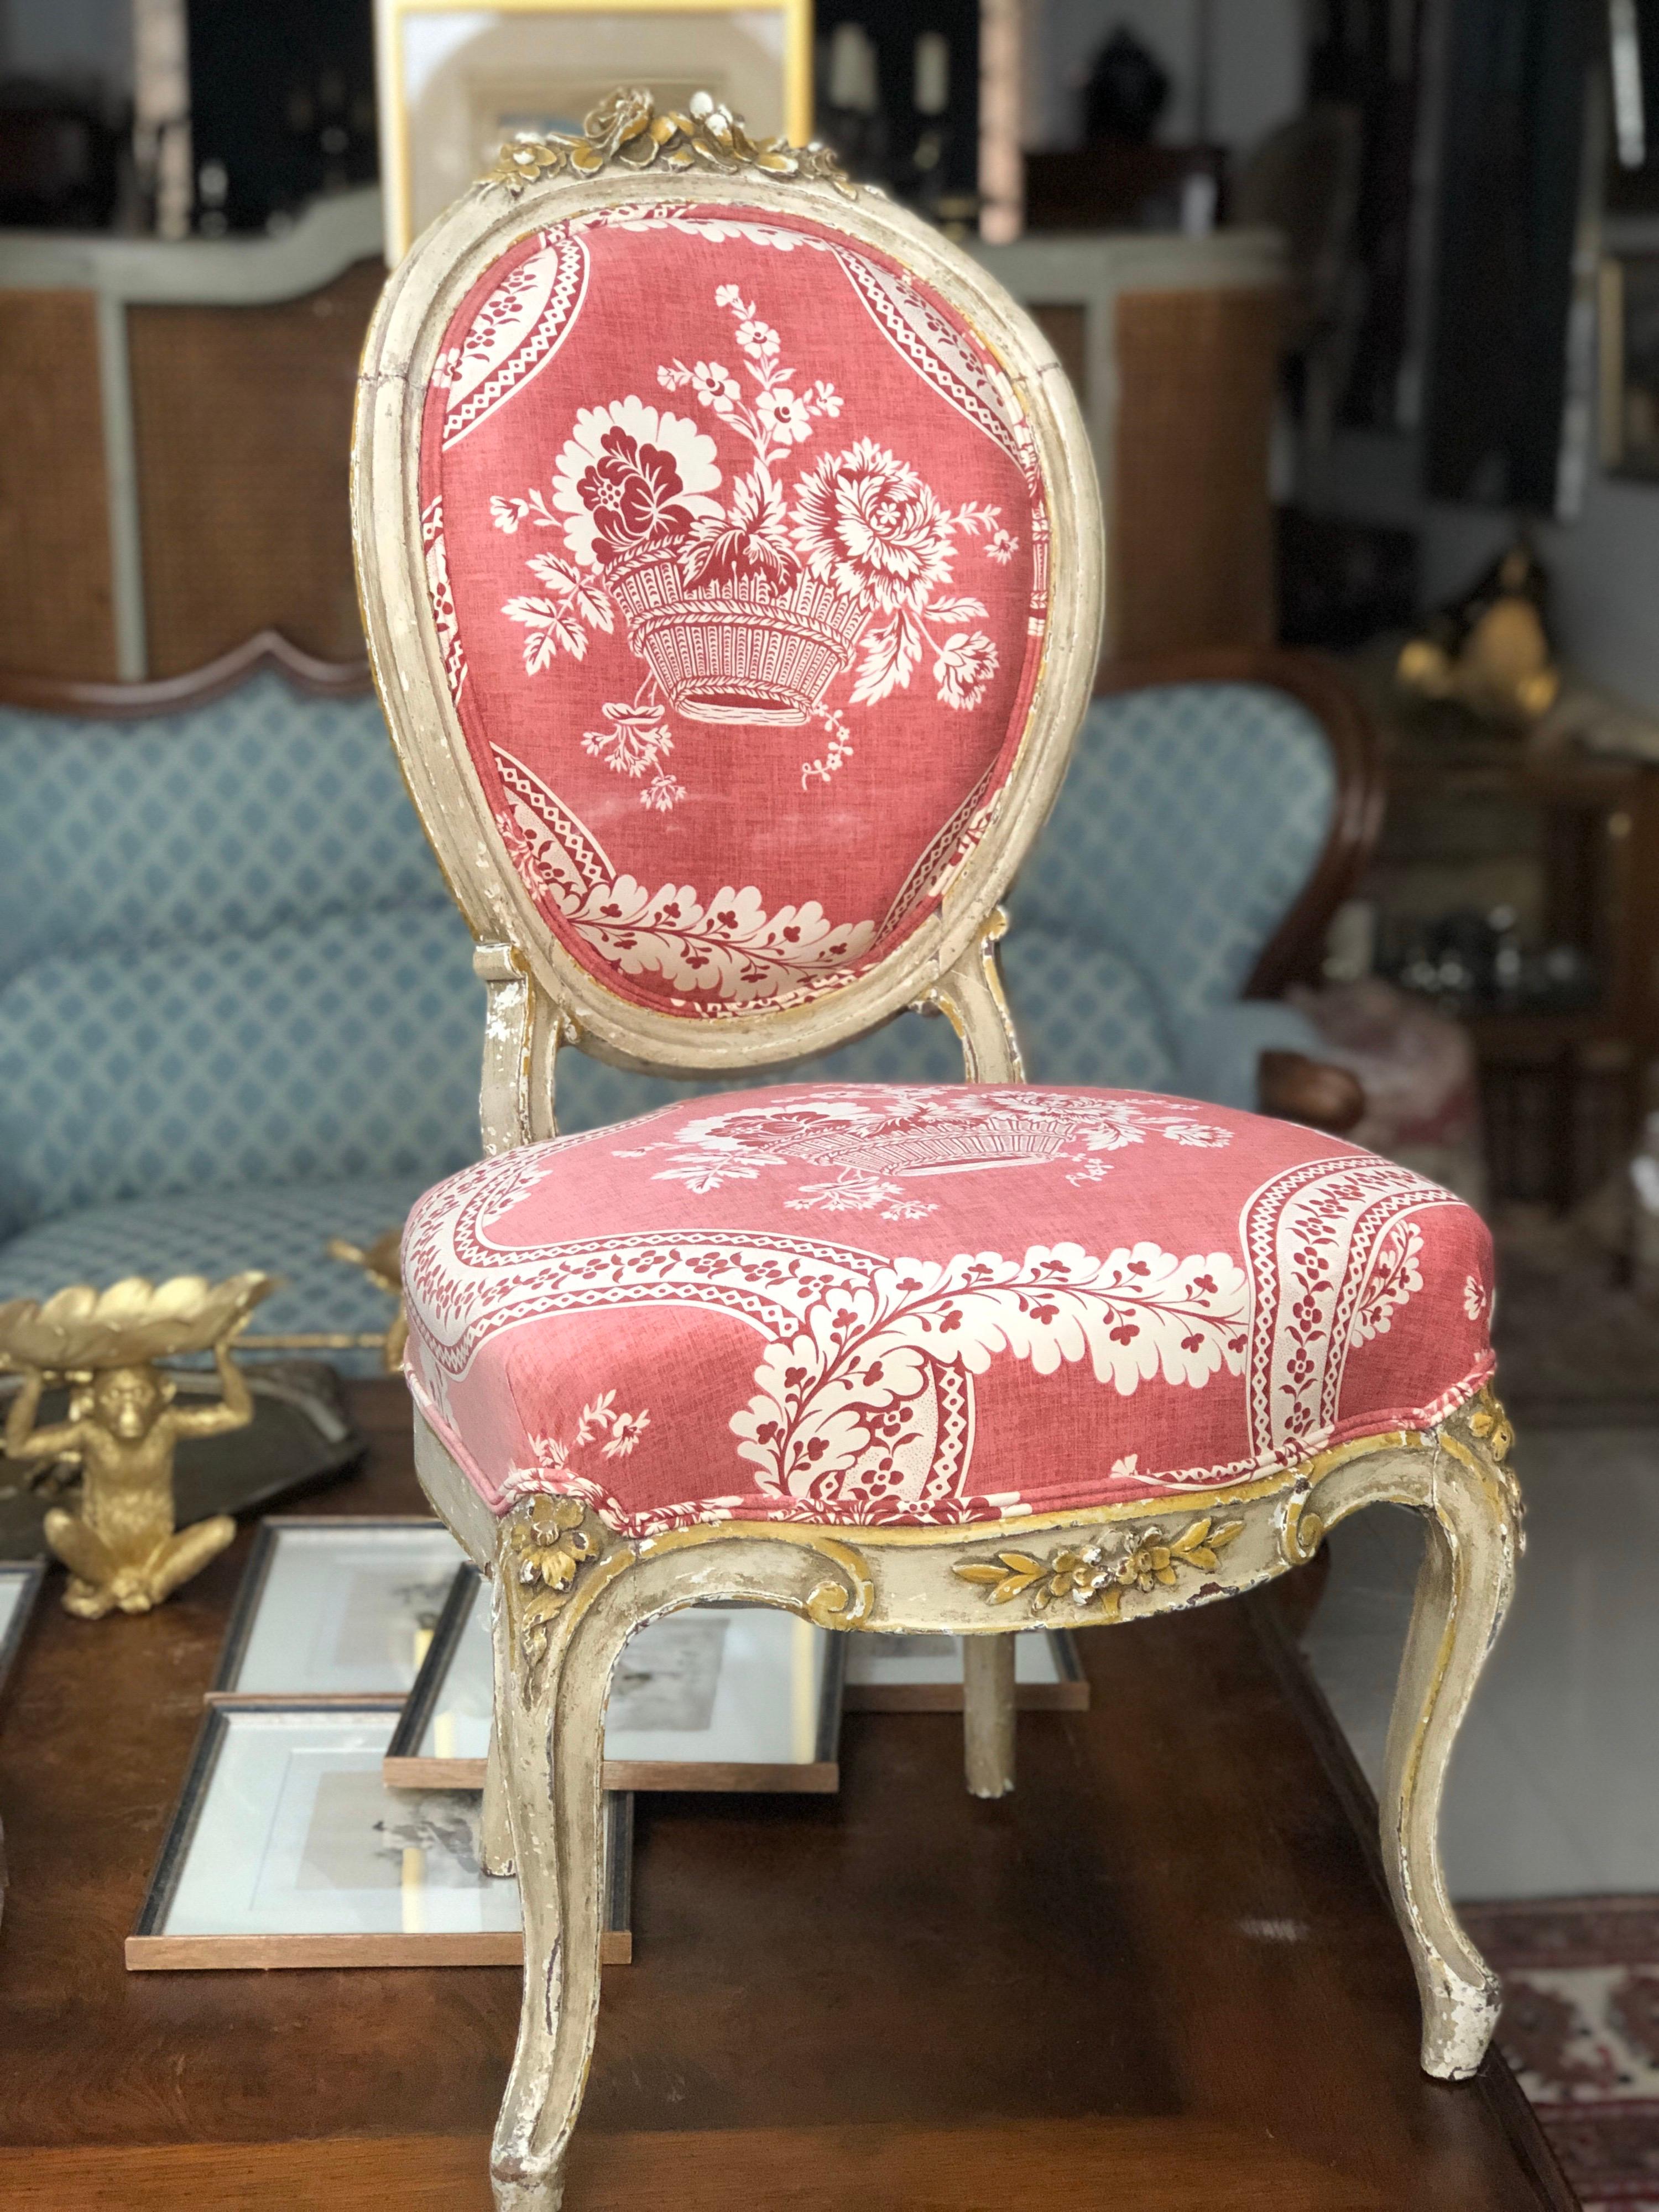 19th century French pair of redecorated and cream coloured lacquered wood chairs with delicate golden painted finish. The chairs have round back in Louis XVI style and are in very good condition.
France, circa 1890.